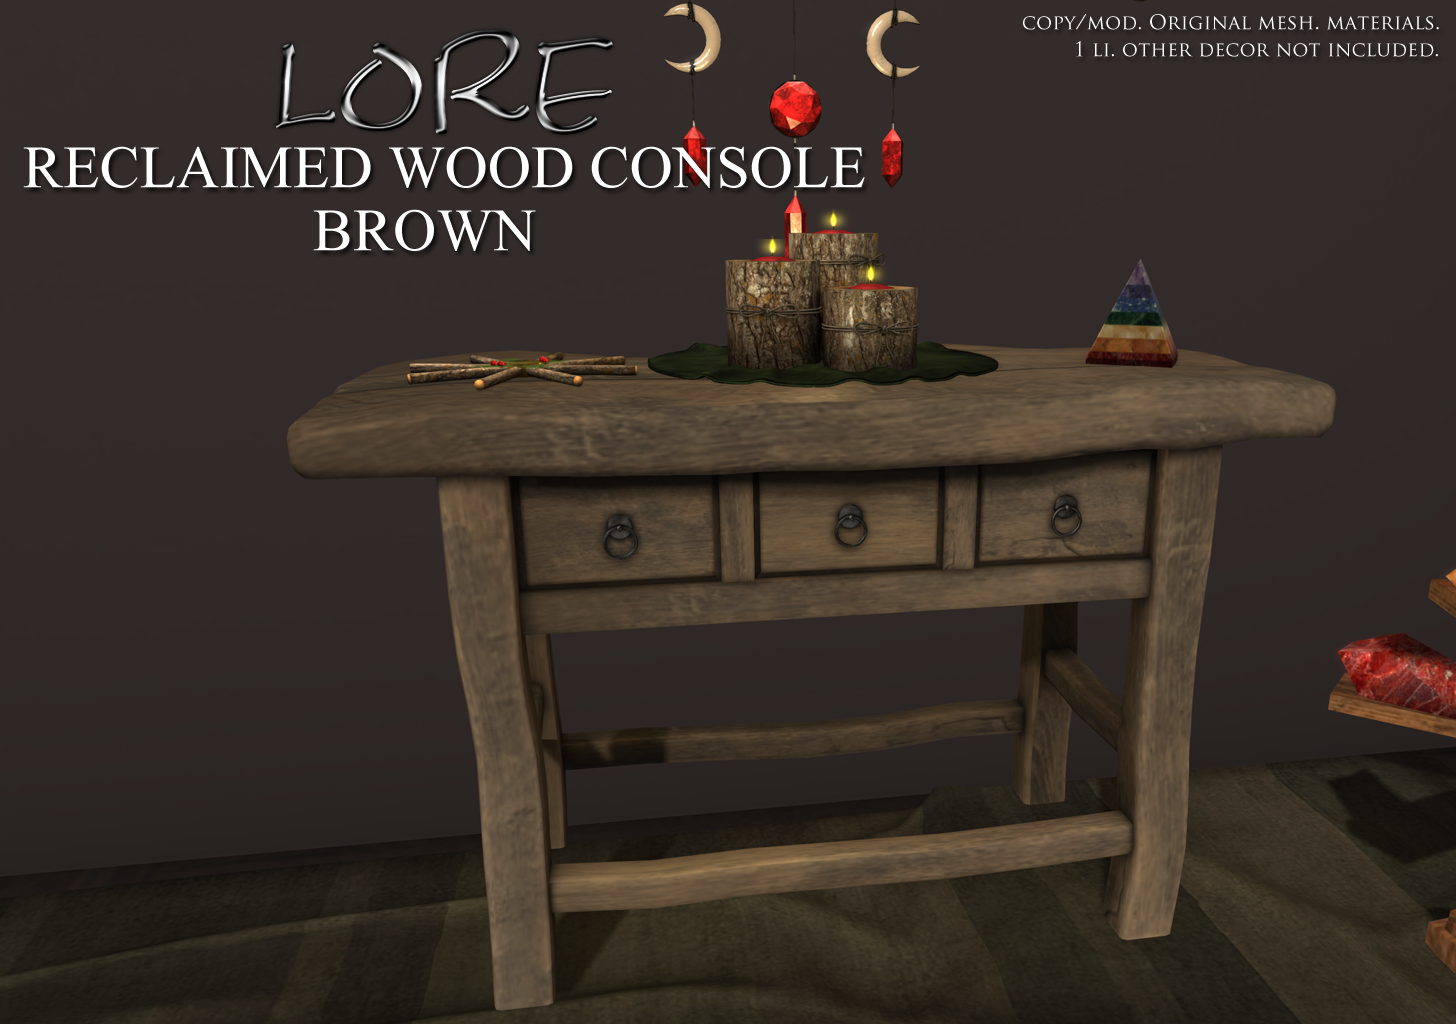 Reclaimed Wood Console Ad Brown